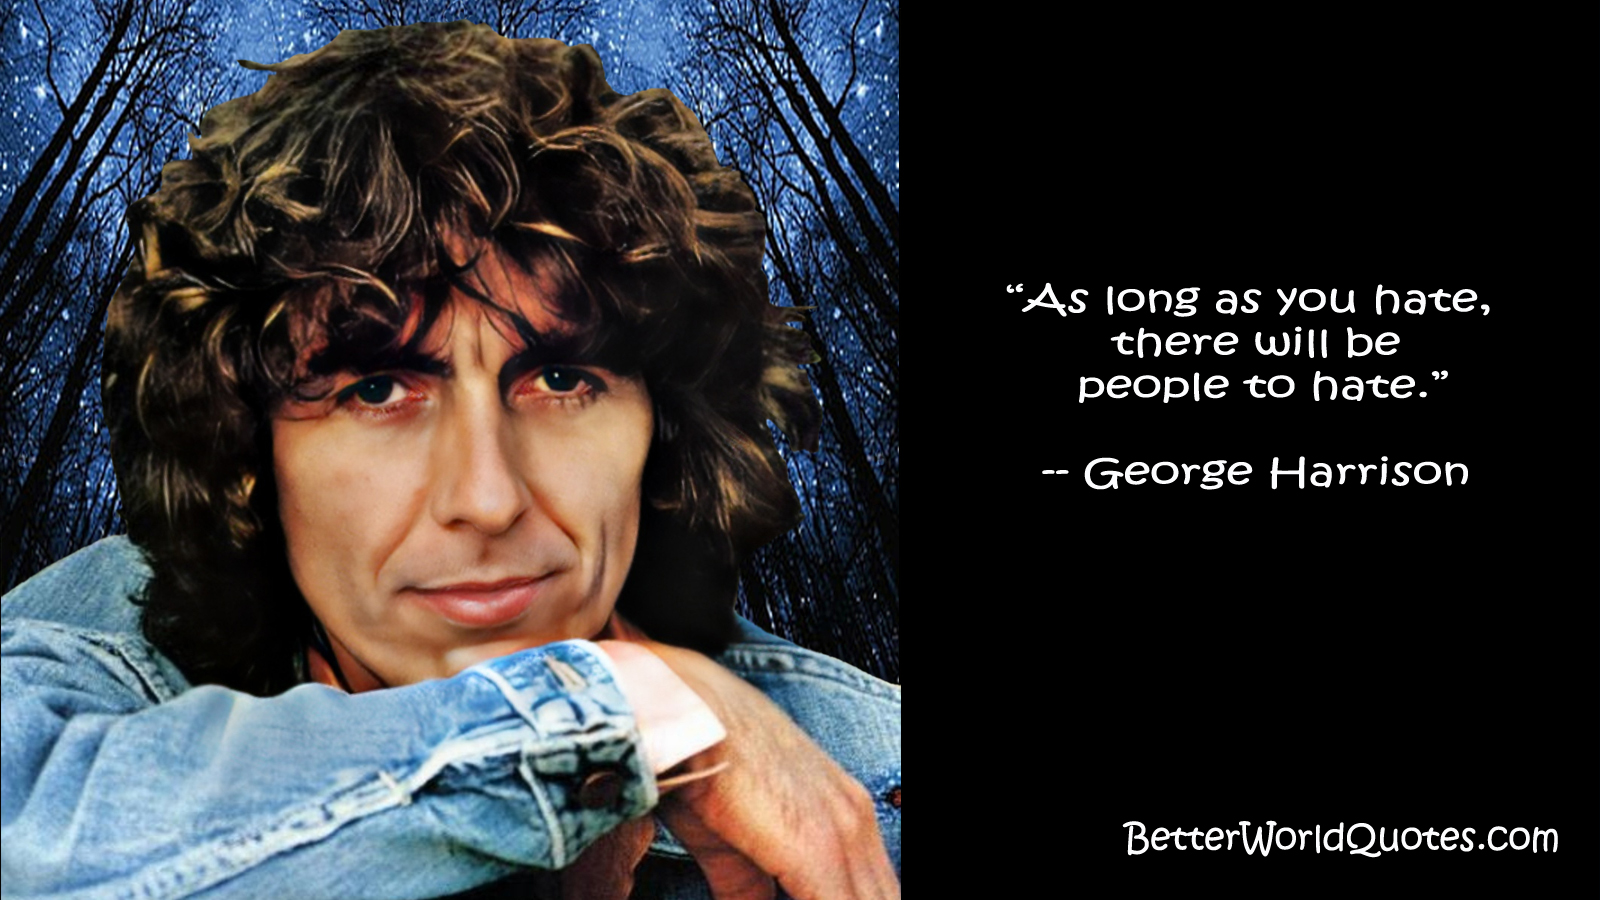 George Harrison: As long as you hate, there will be people to hate.